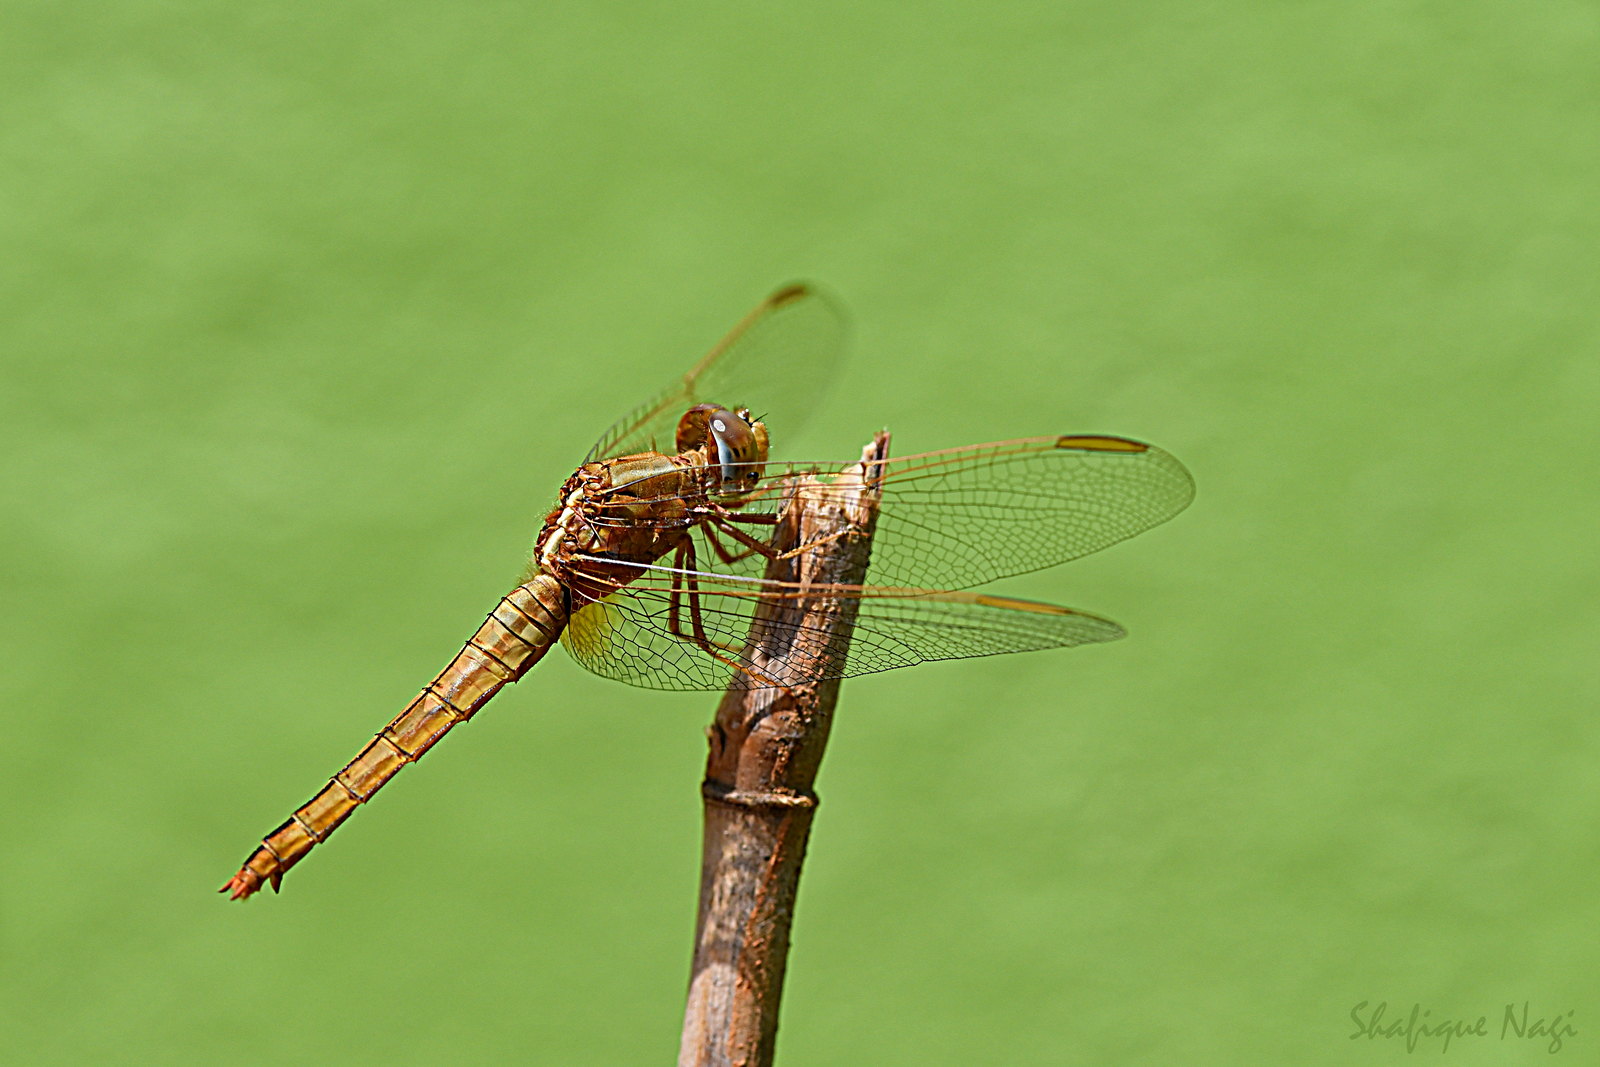 My only dragonfly shot in 2016